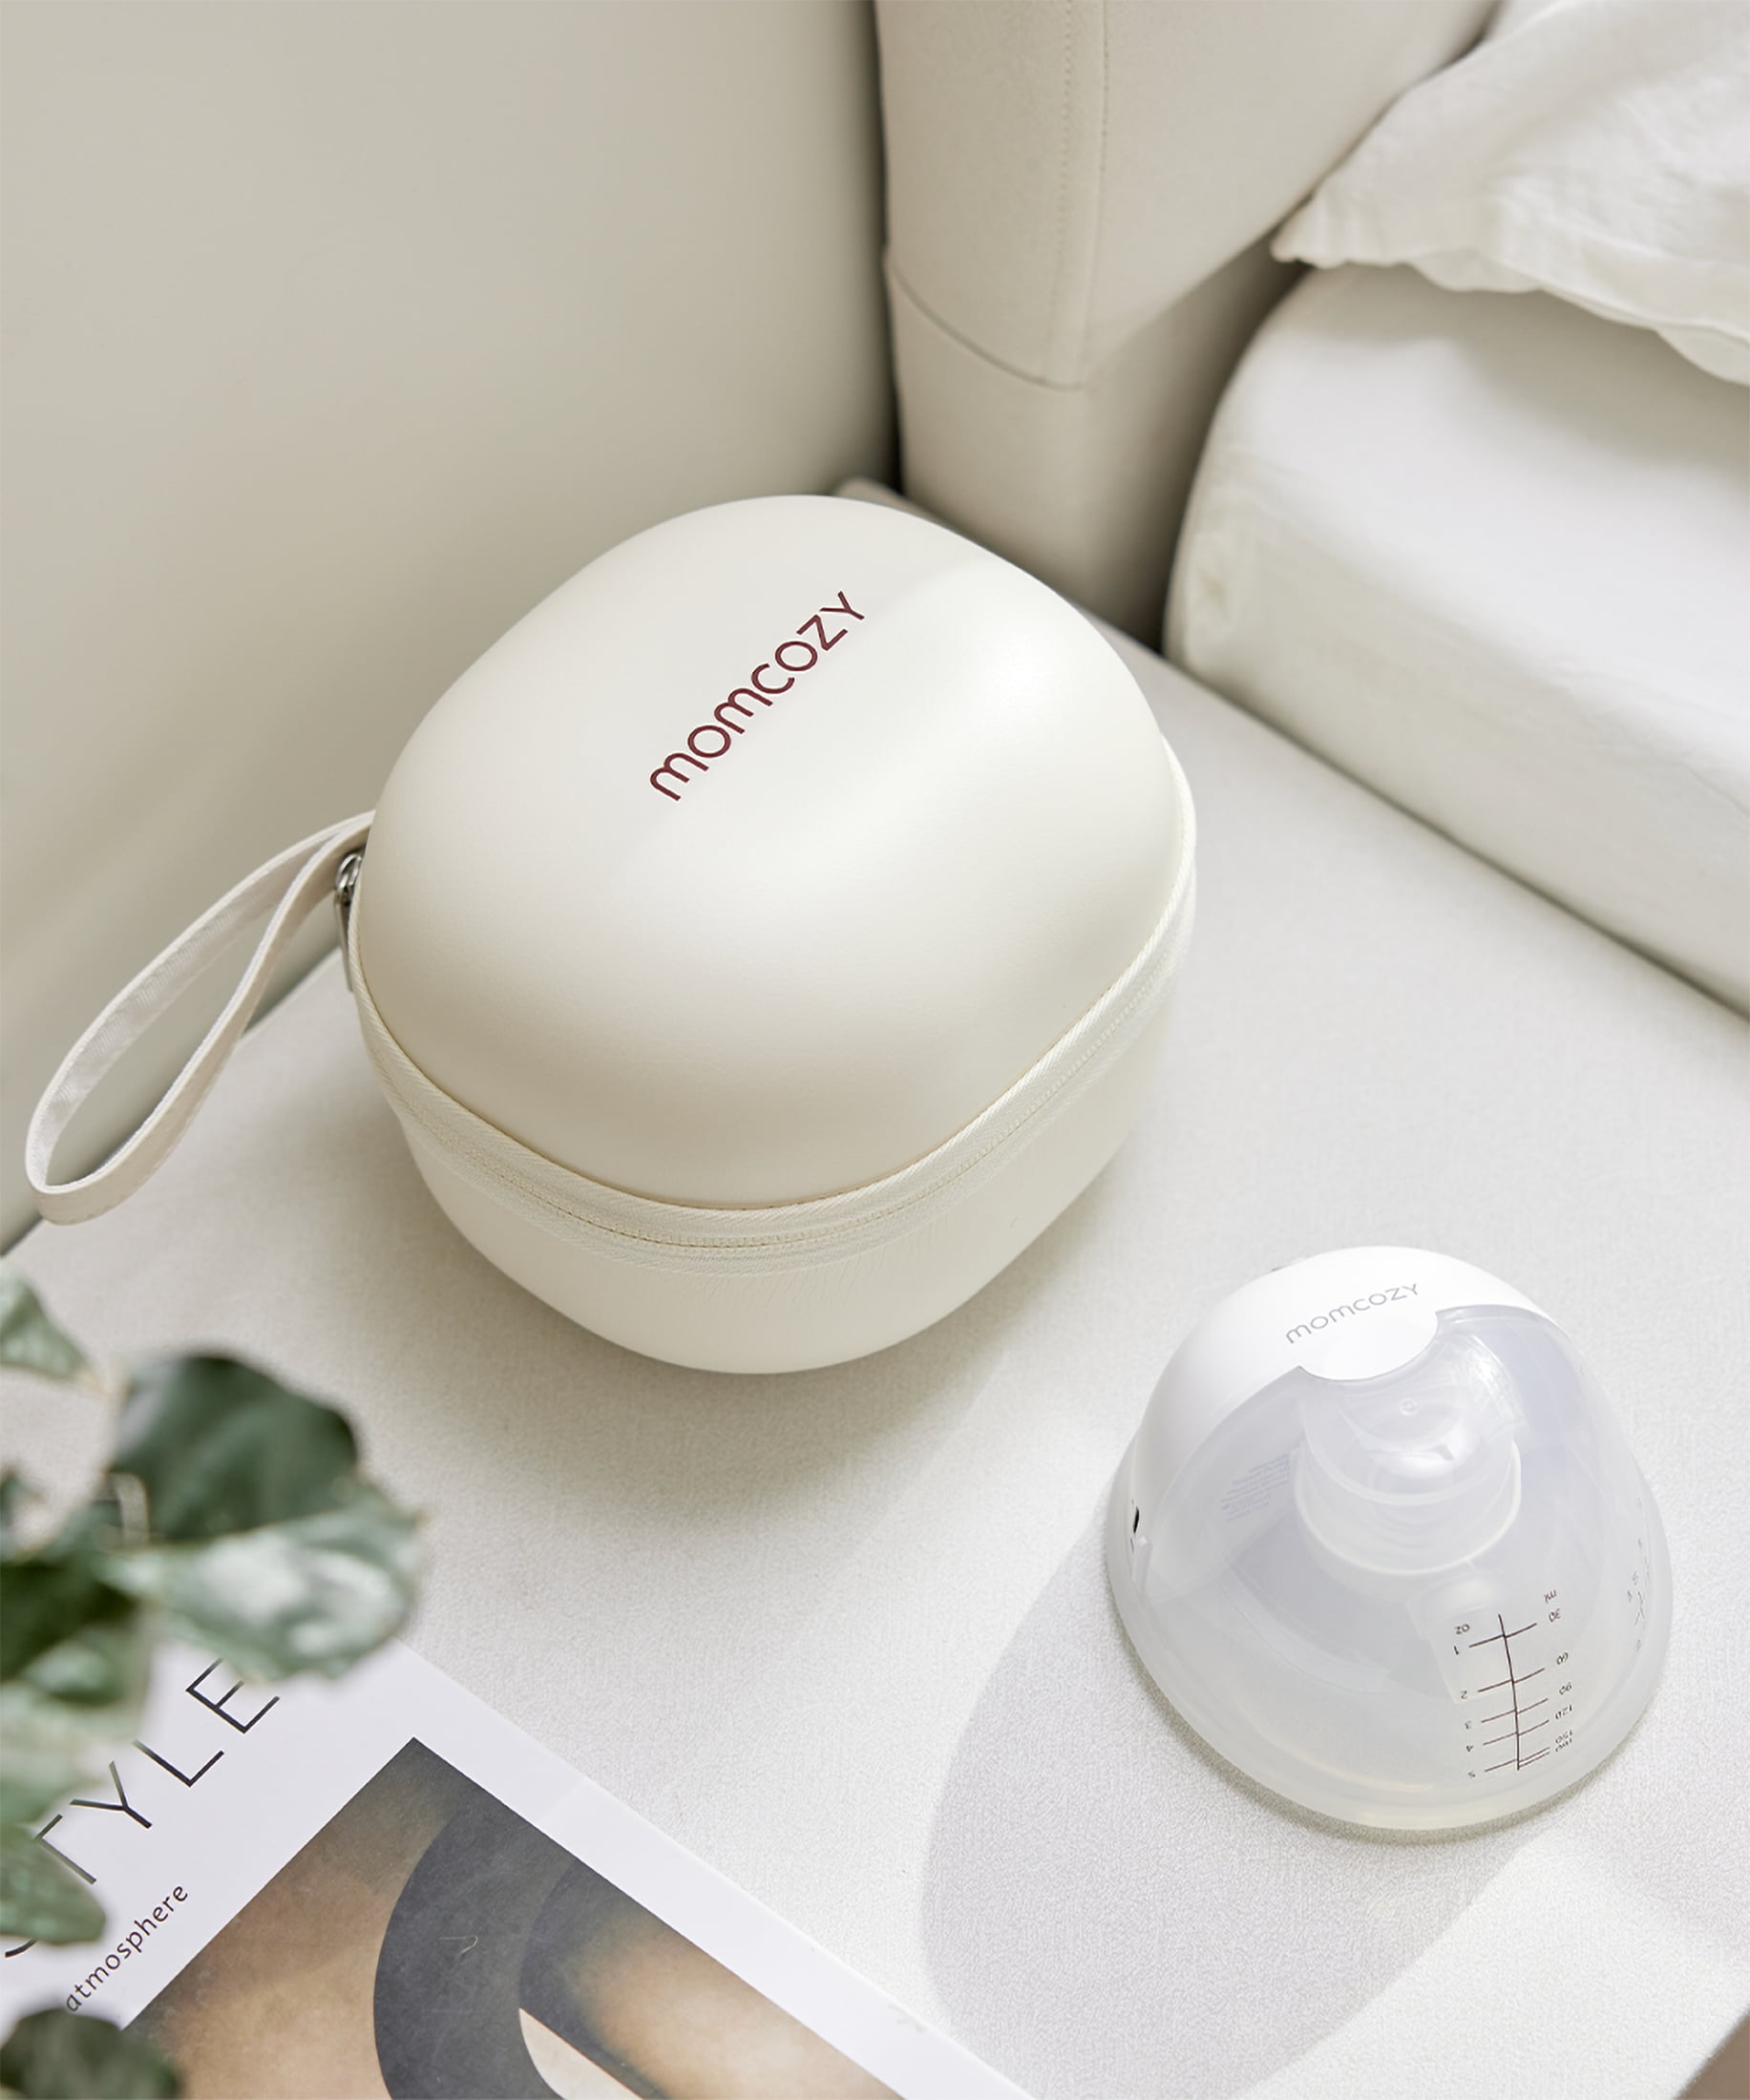 Momcozy Muse 5 Wearable Breast Pump, Electric Breast Pump